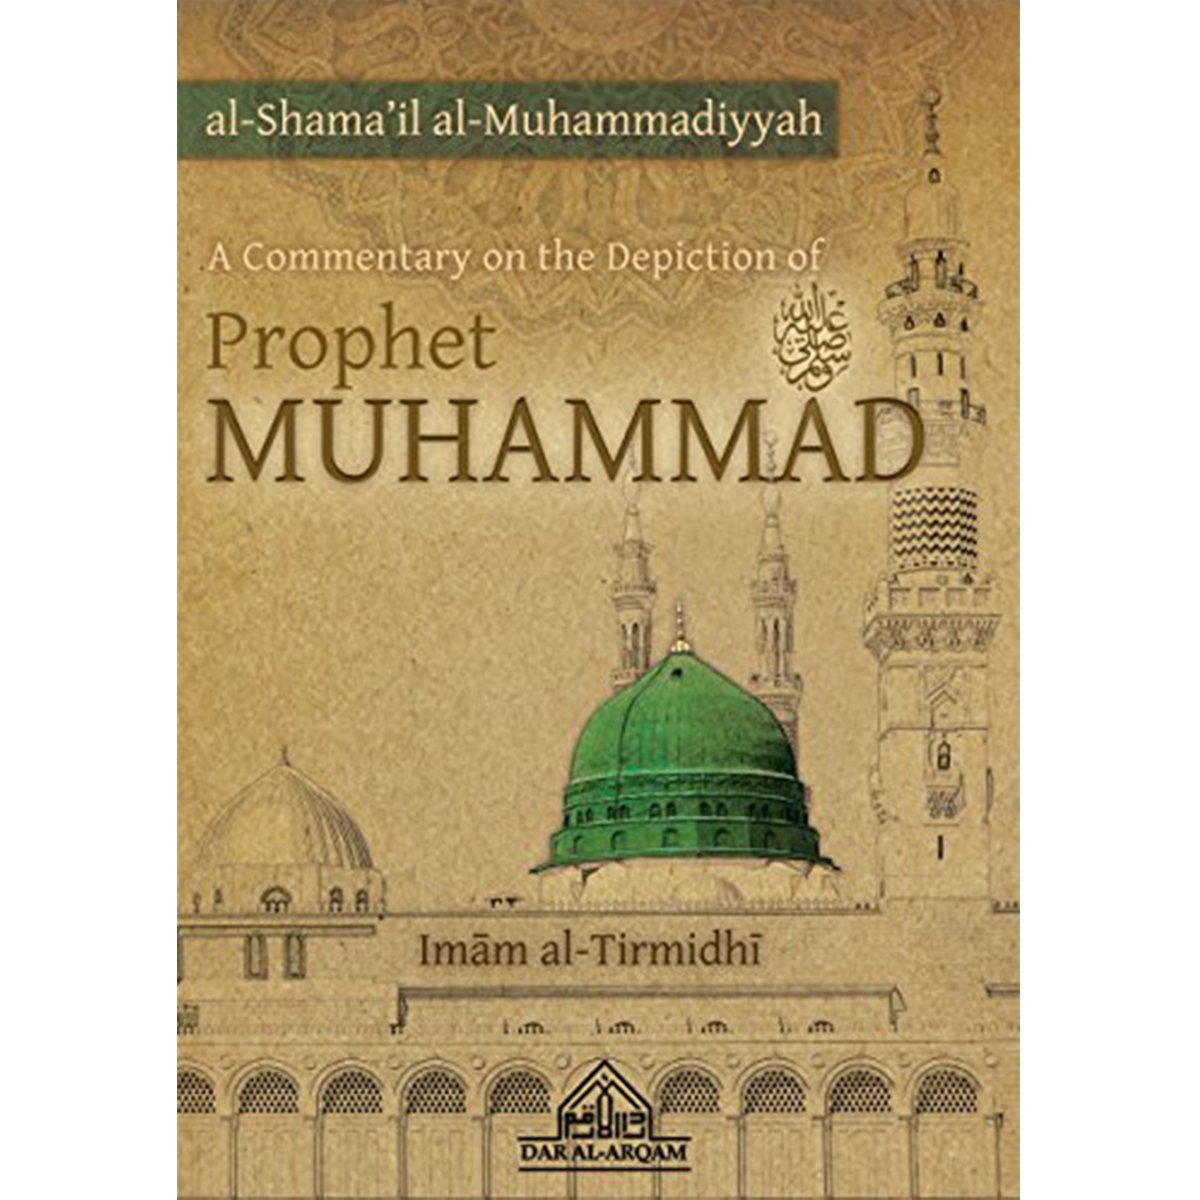 A Commentary On The Depiction Of The Prophet-almanaar Islamic Store